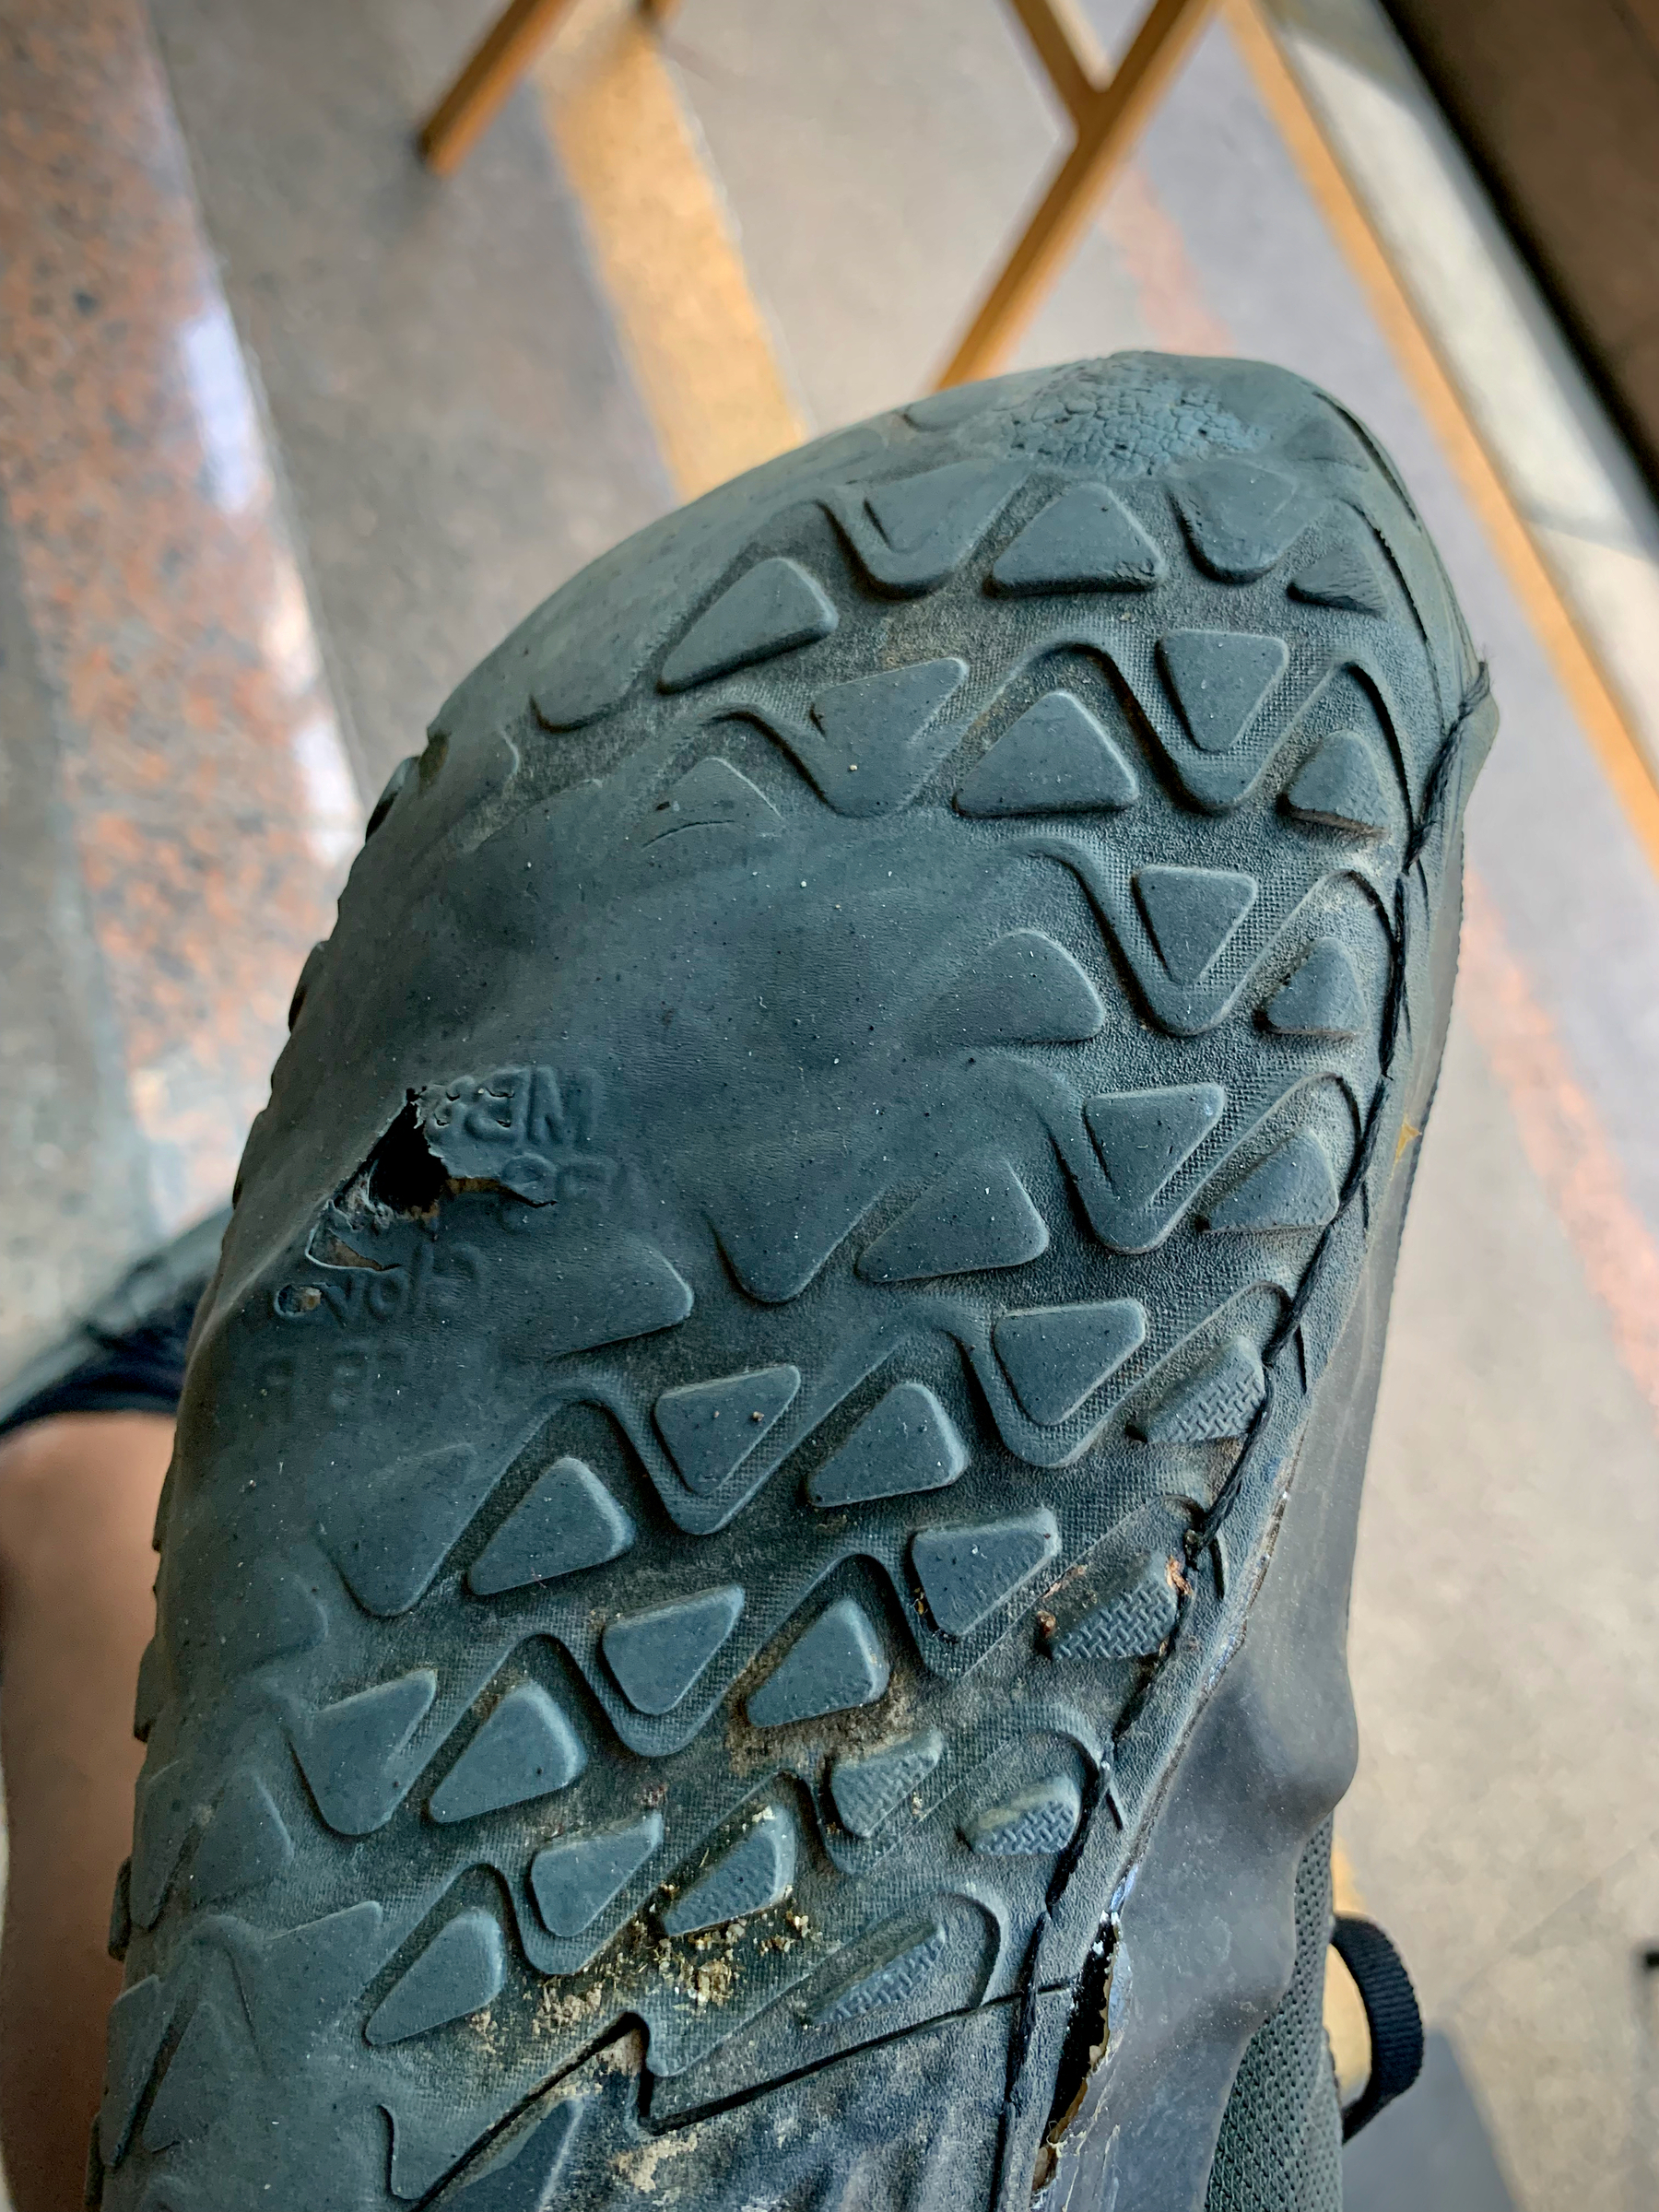 Worn out sole of a shoe